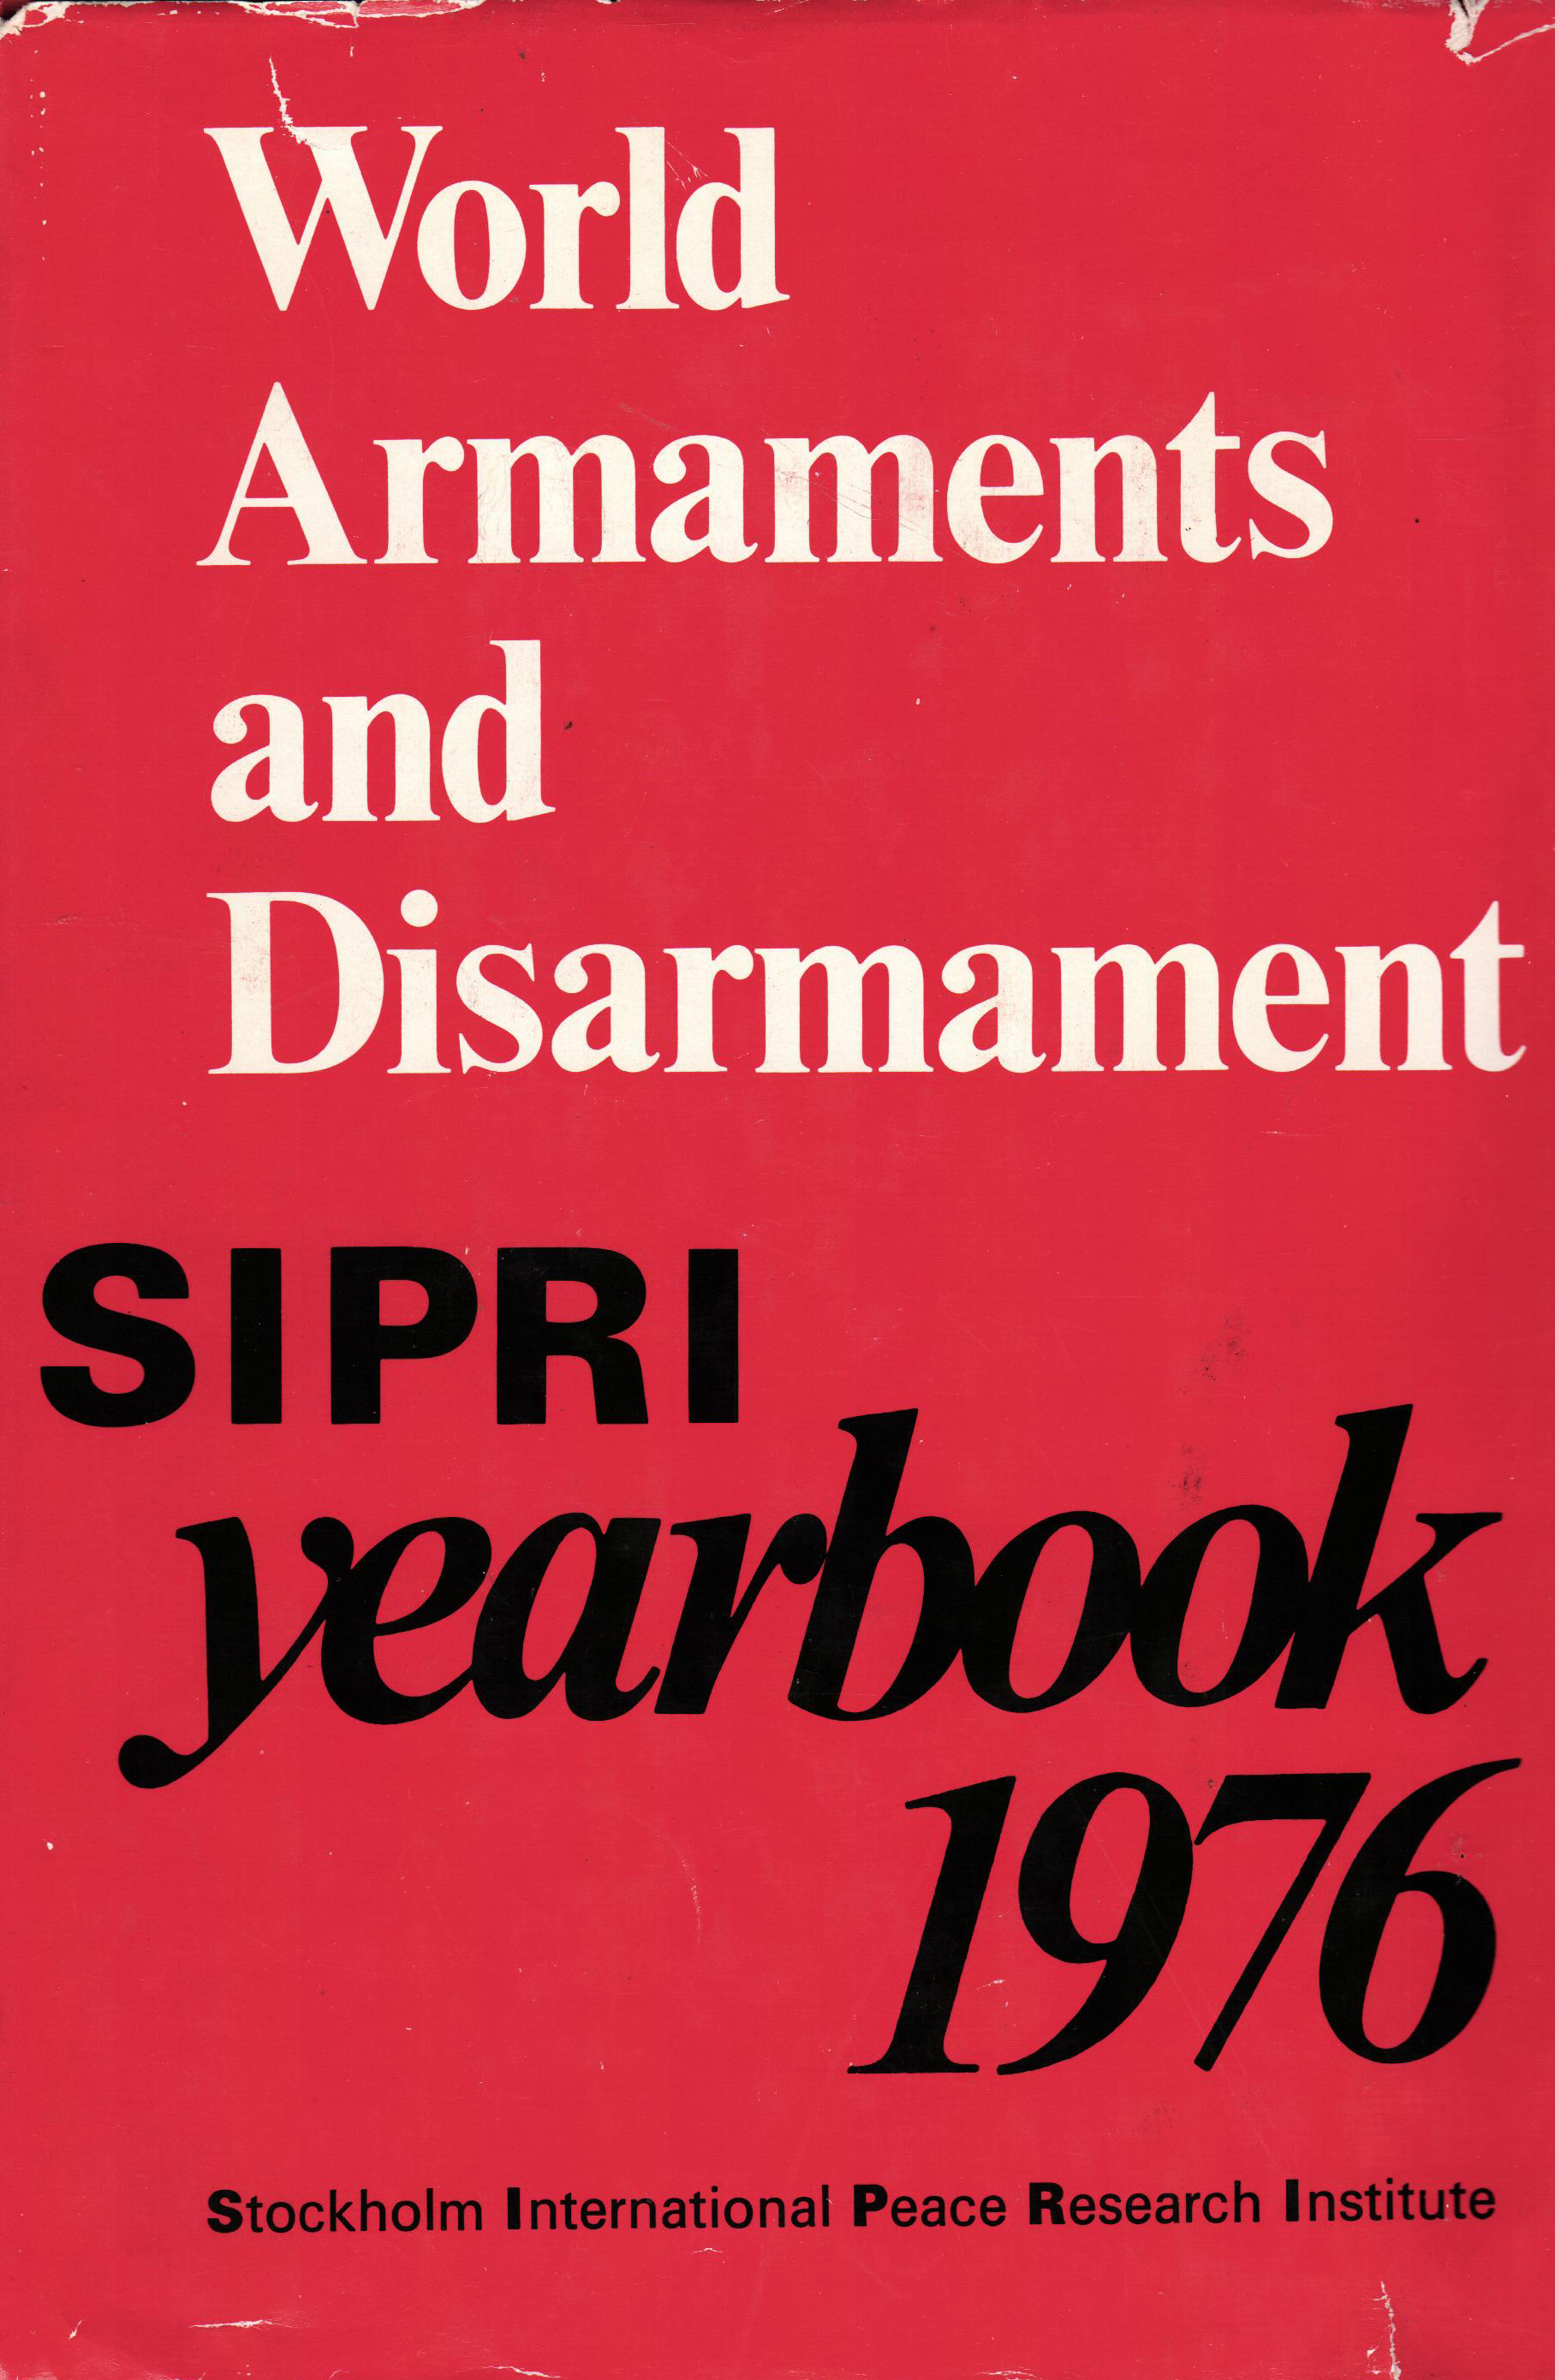 SIPRI yearbook 1976 cover